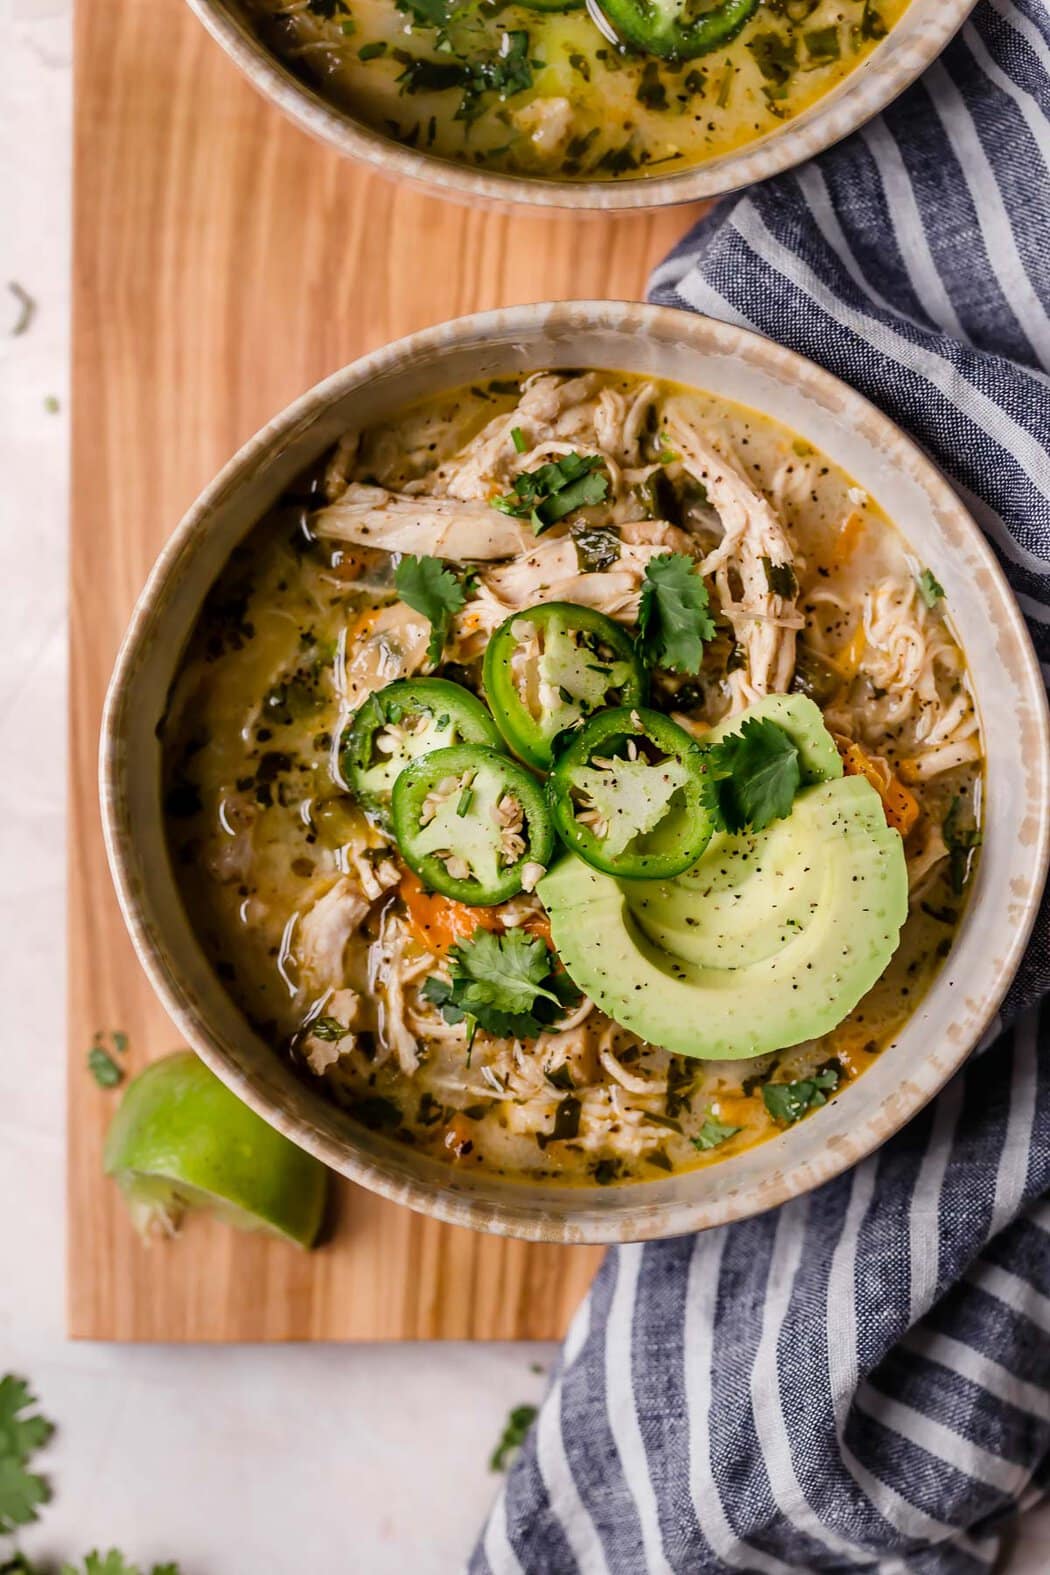 https://therealfooddietitians.com/wp-content/uploads/2020/10/WEB-Instant-Pot-White-Chicken-Chili-Finals-8.jpg